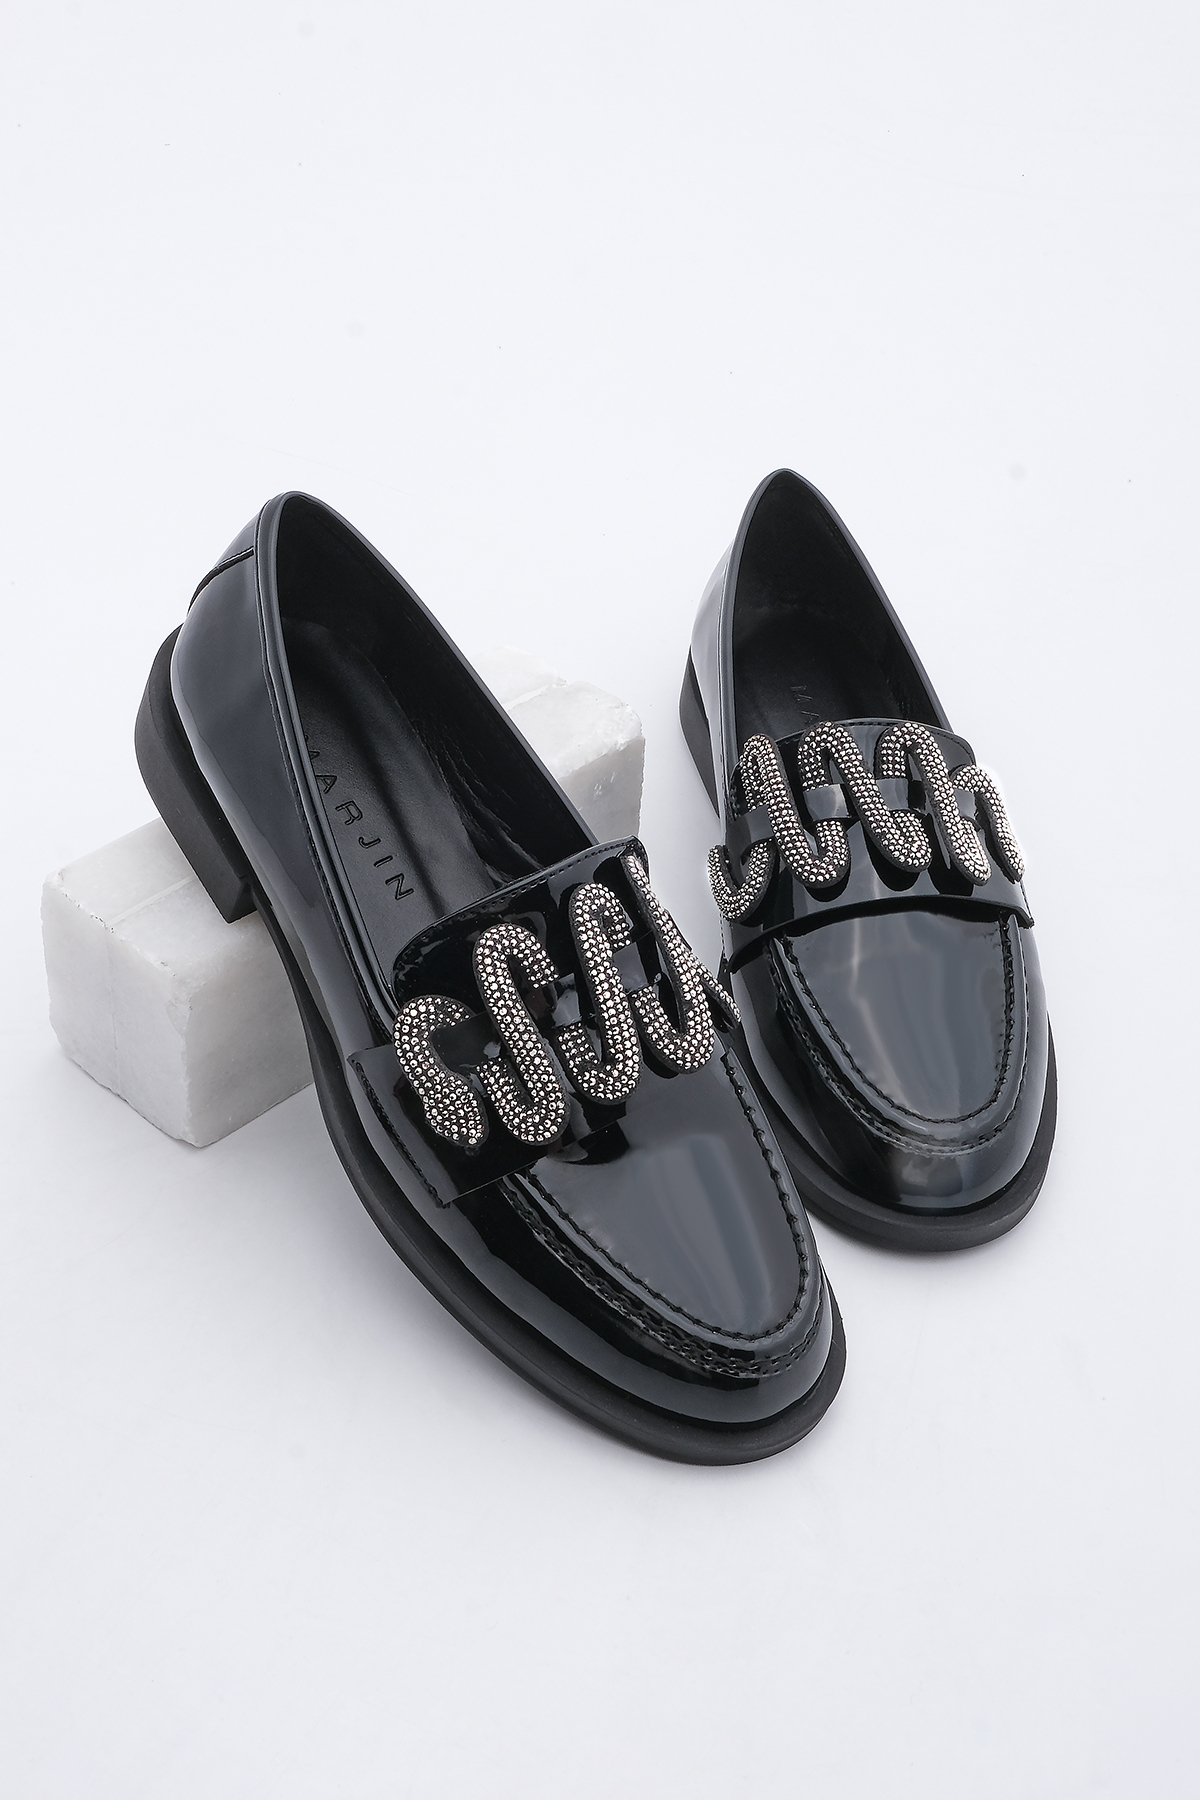 Marjin Women's Loafer Stoned Casual Shoes Alseka Black Patent Leather